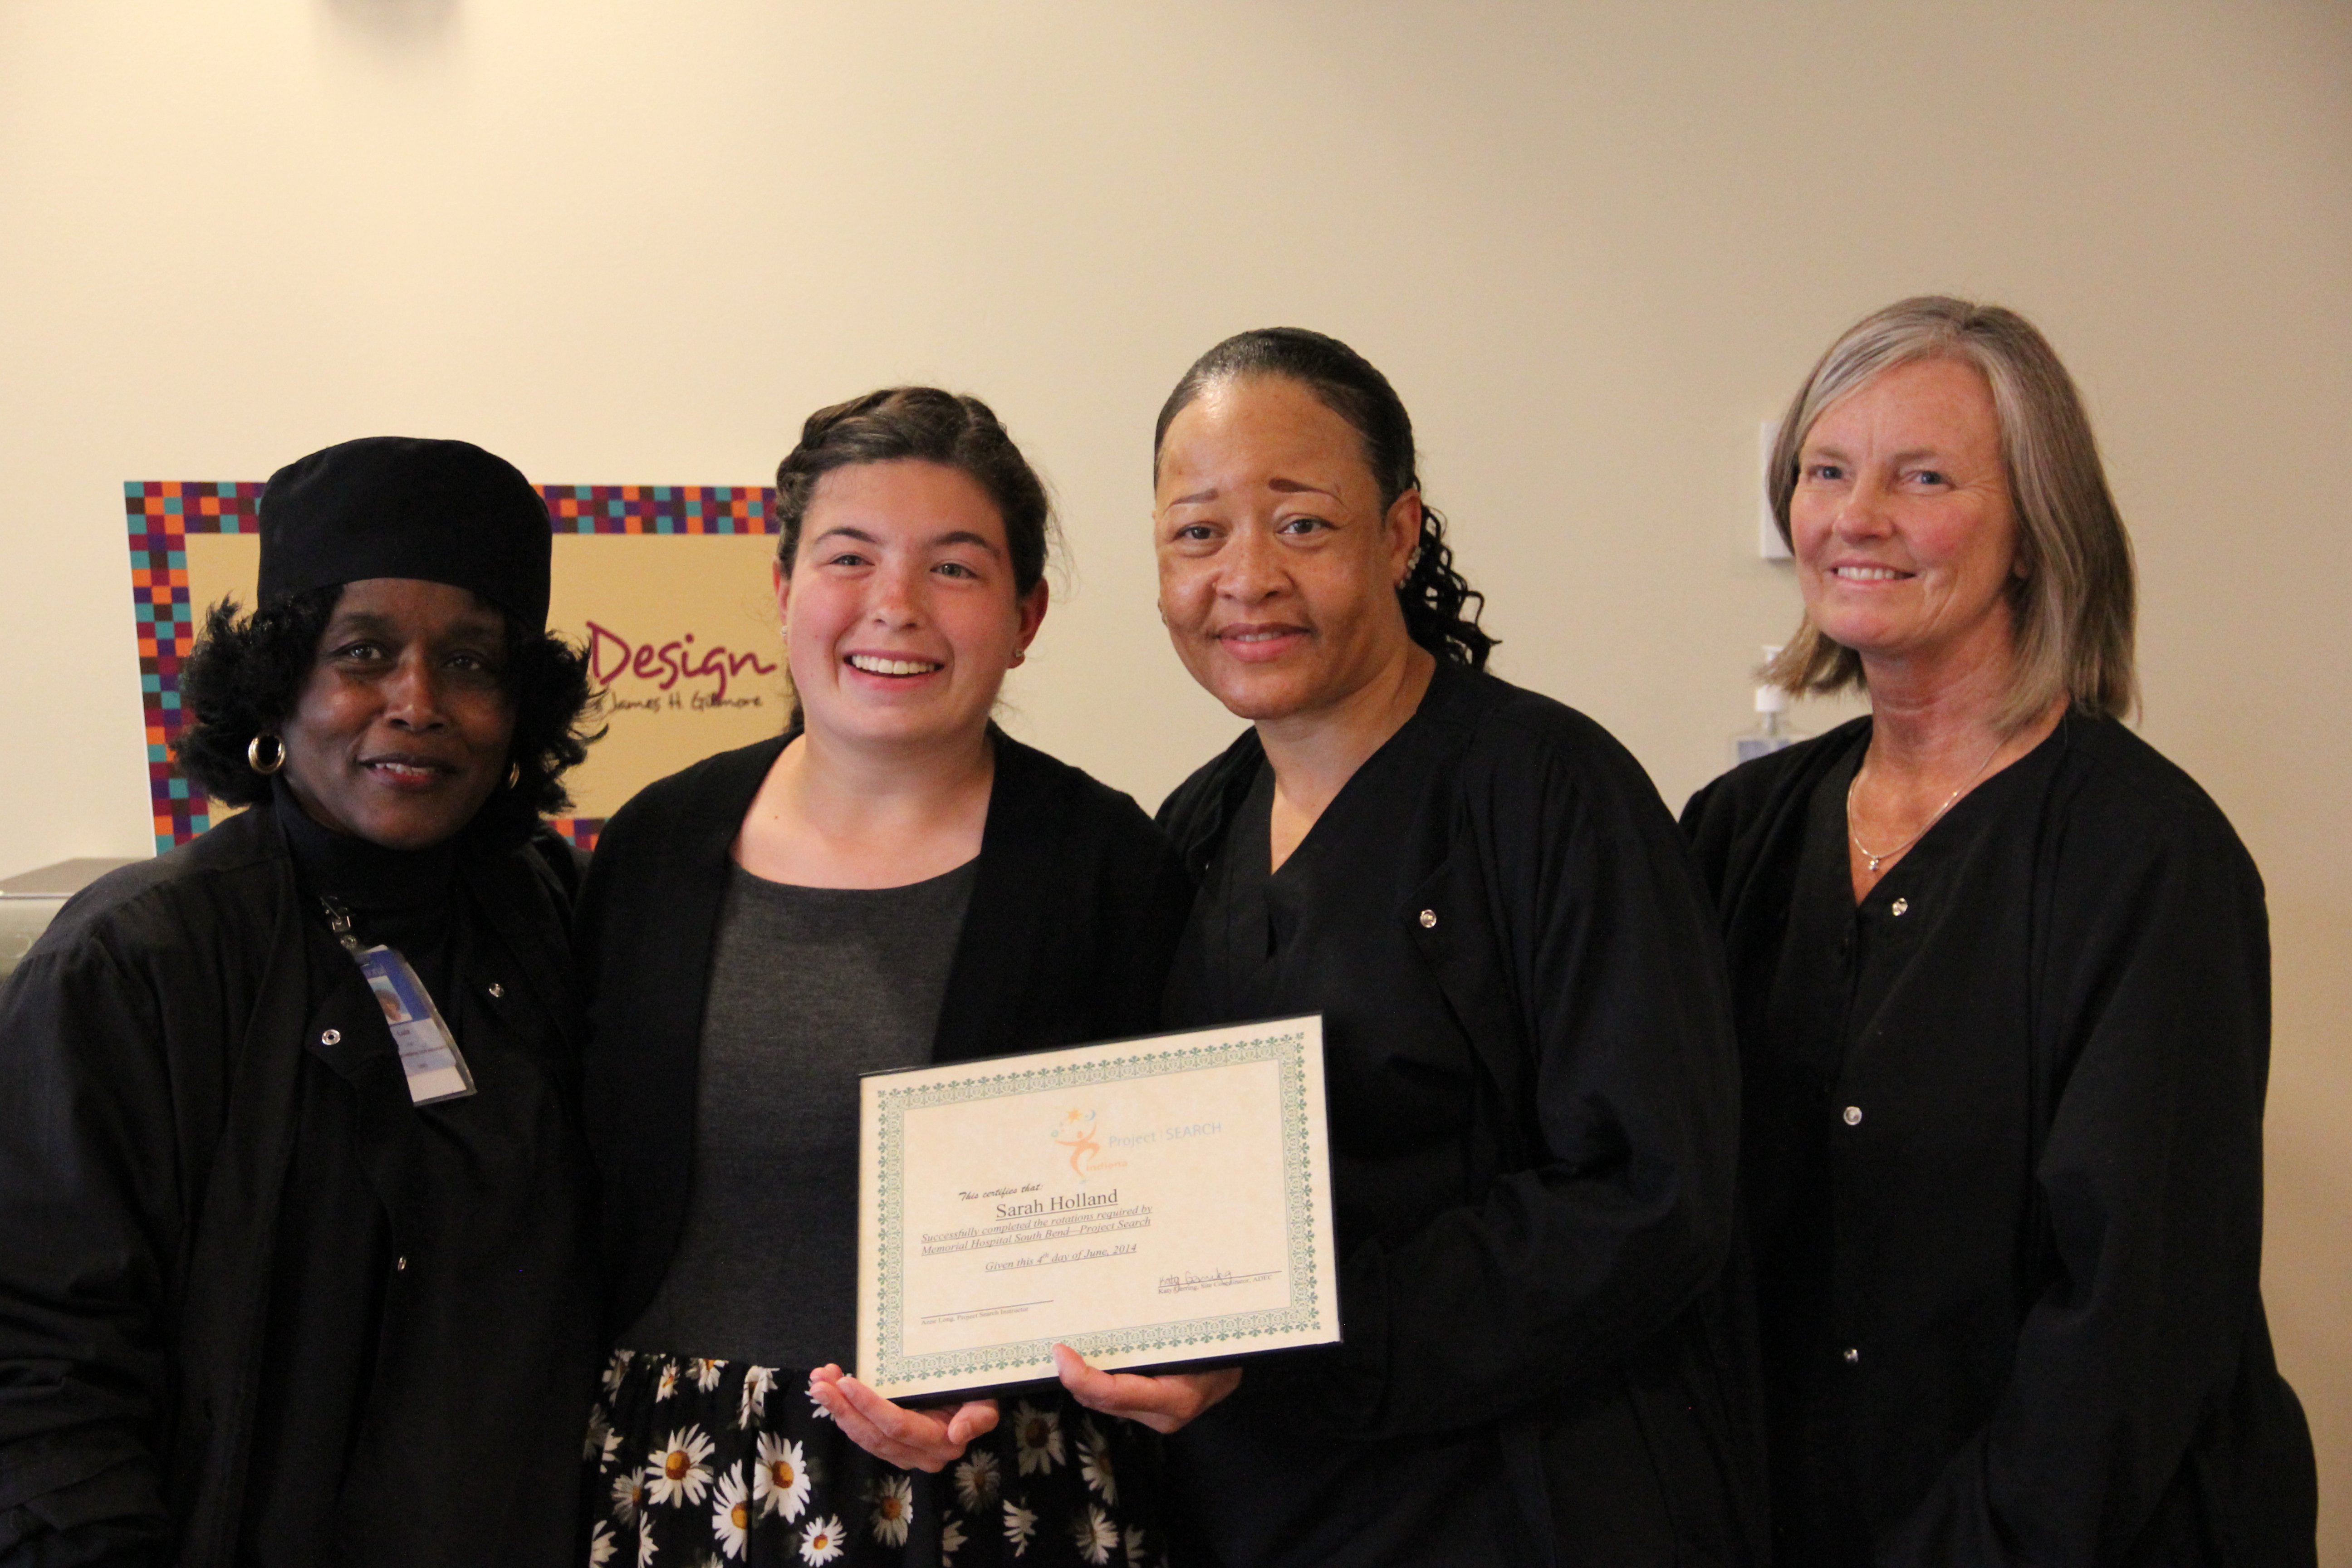 Holding her graduation certificate, Sarah Holland poses for a photo with one of the crews she worked with on a Project Search rotation at Memorial Hospital, South Bend.